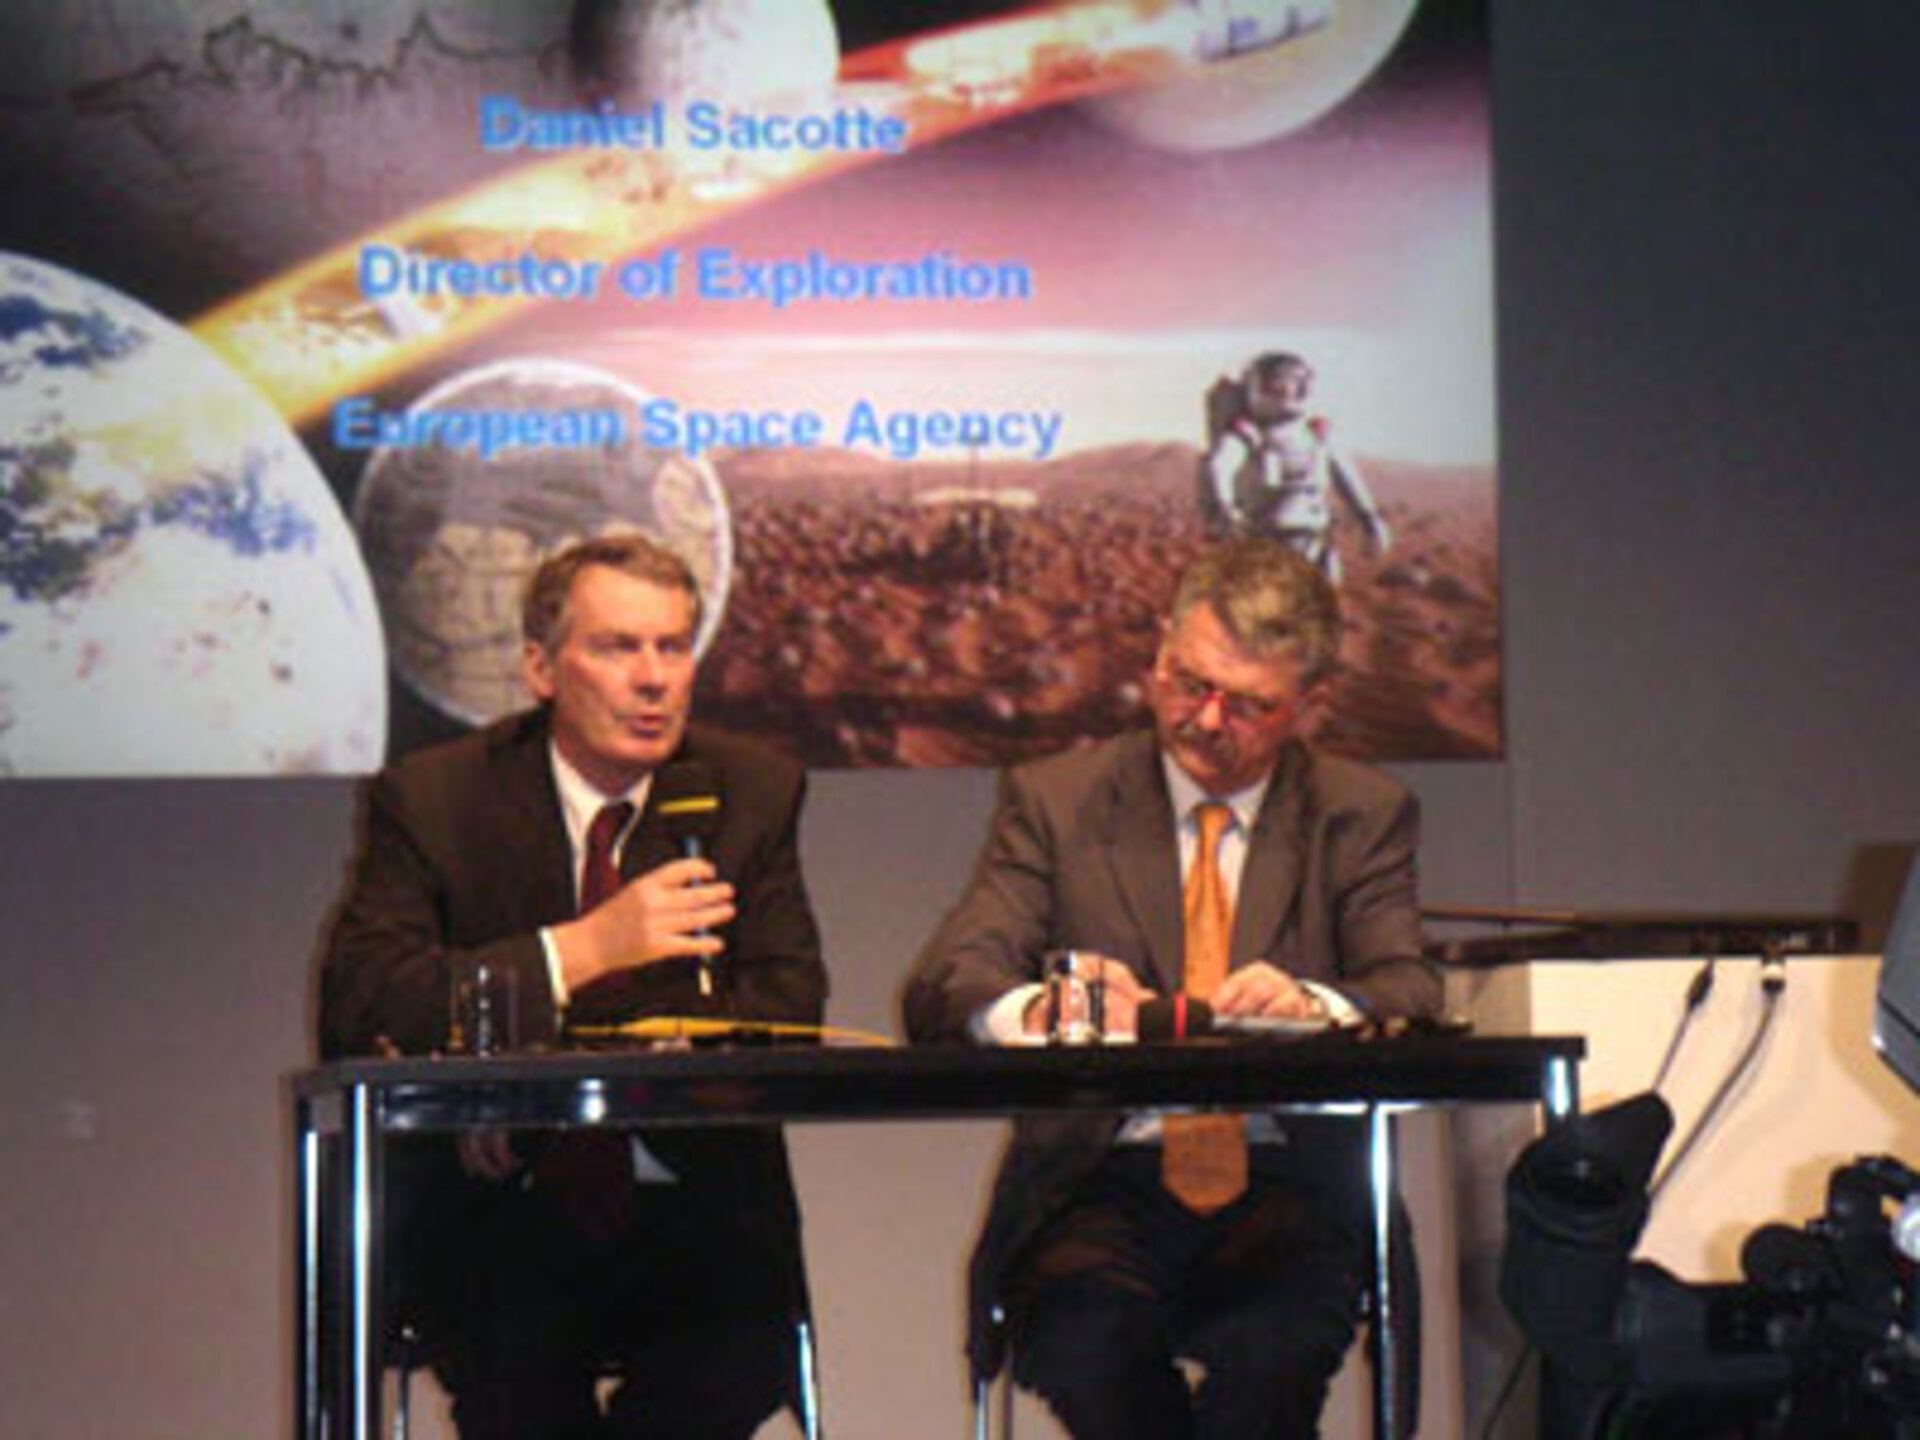 Press briefing with Daniel Sacotte, future ESA Director of Human Spaceflight, Microgravity and Exploration